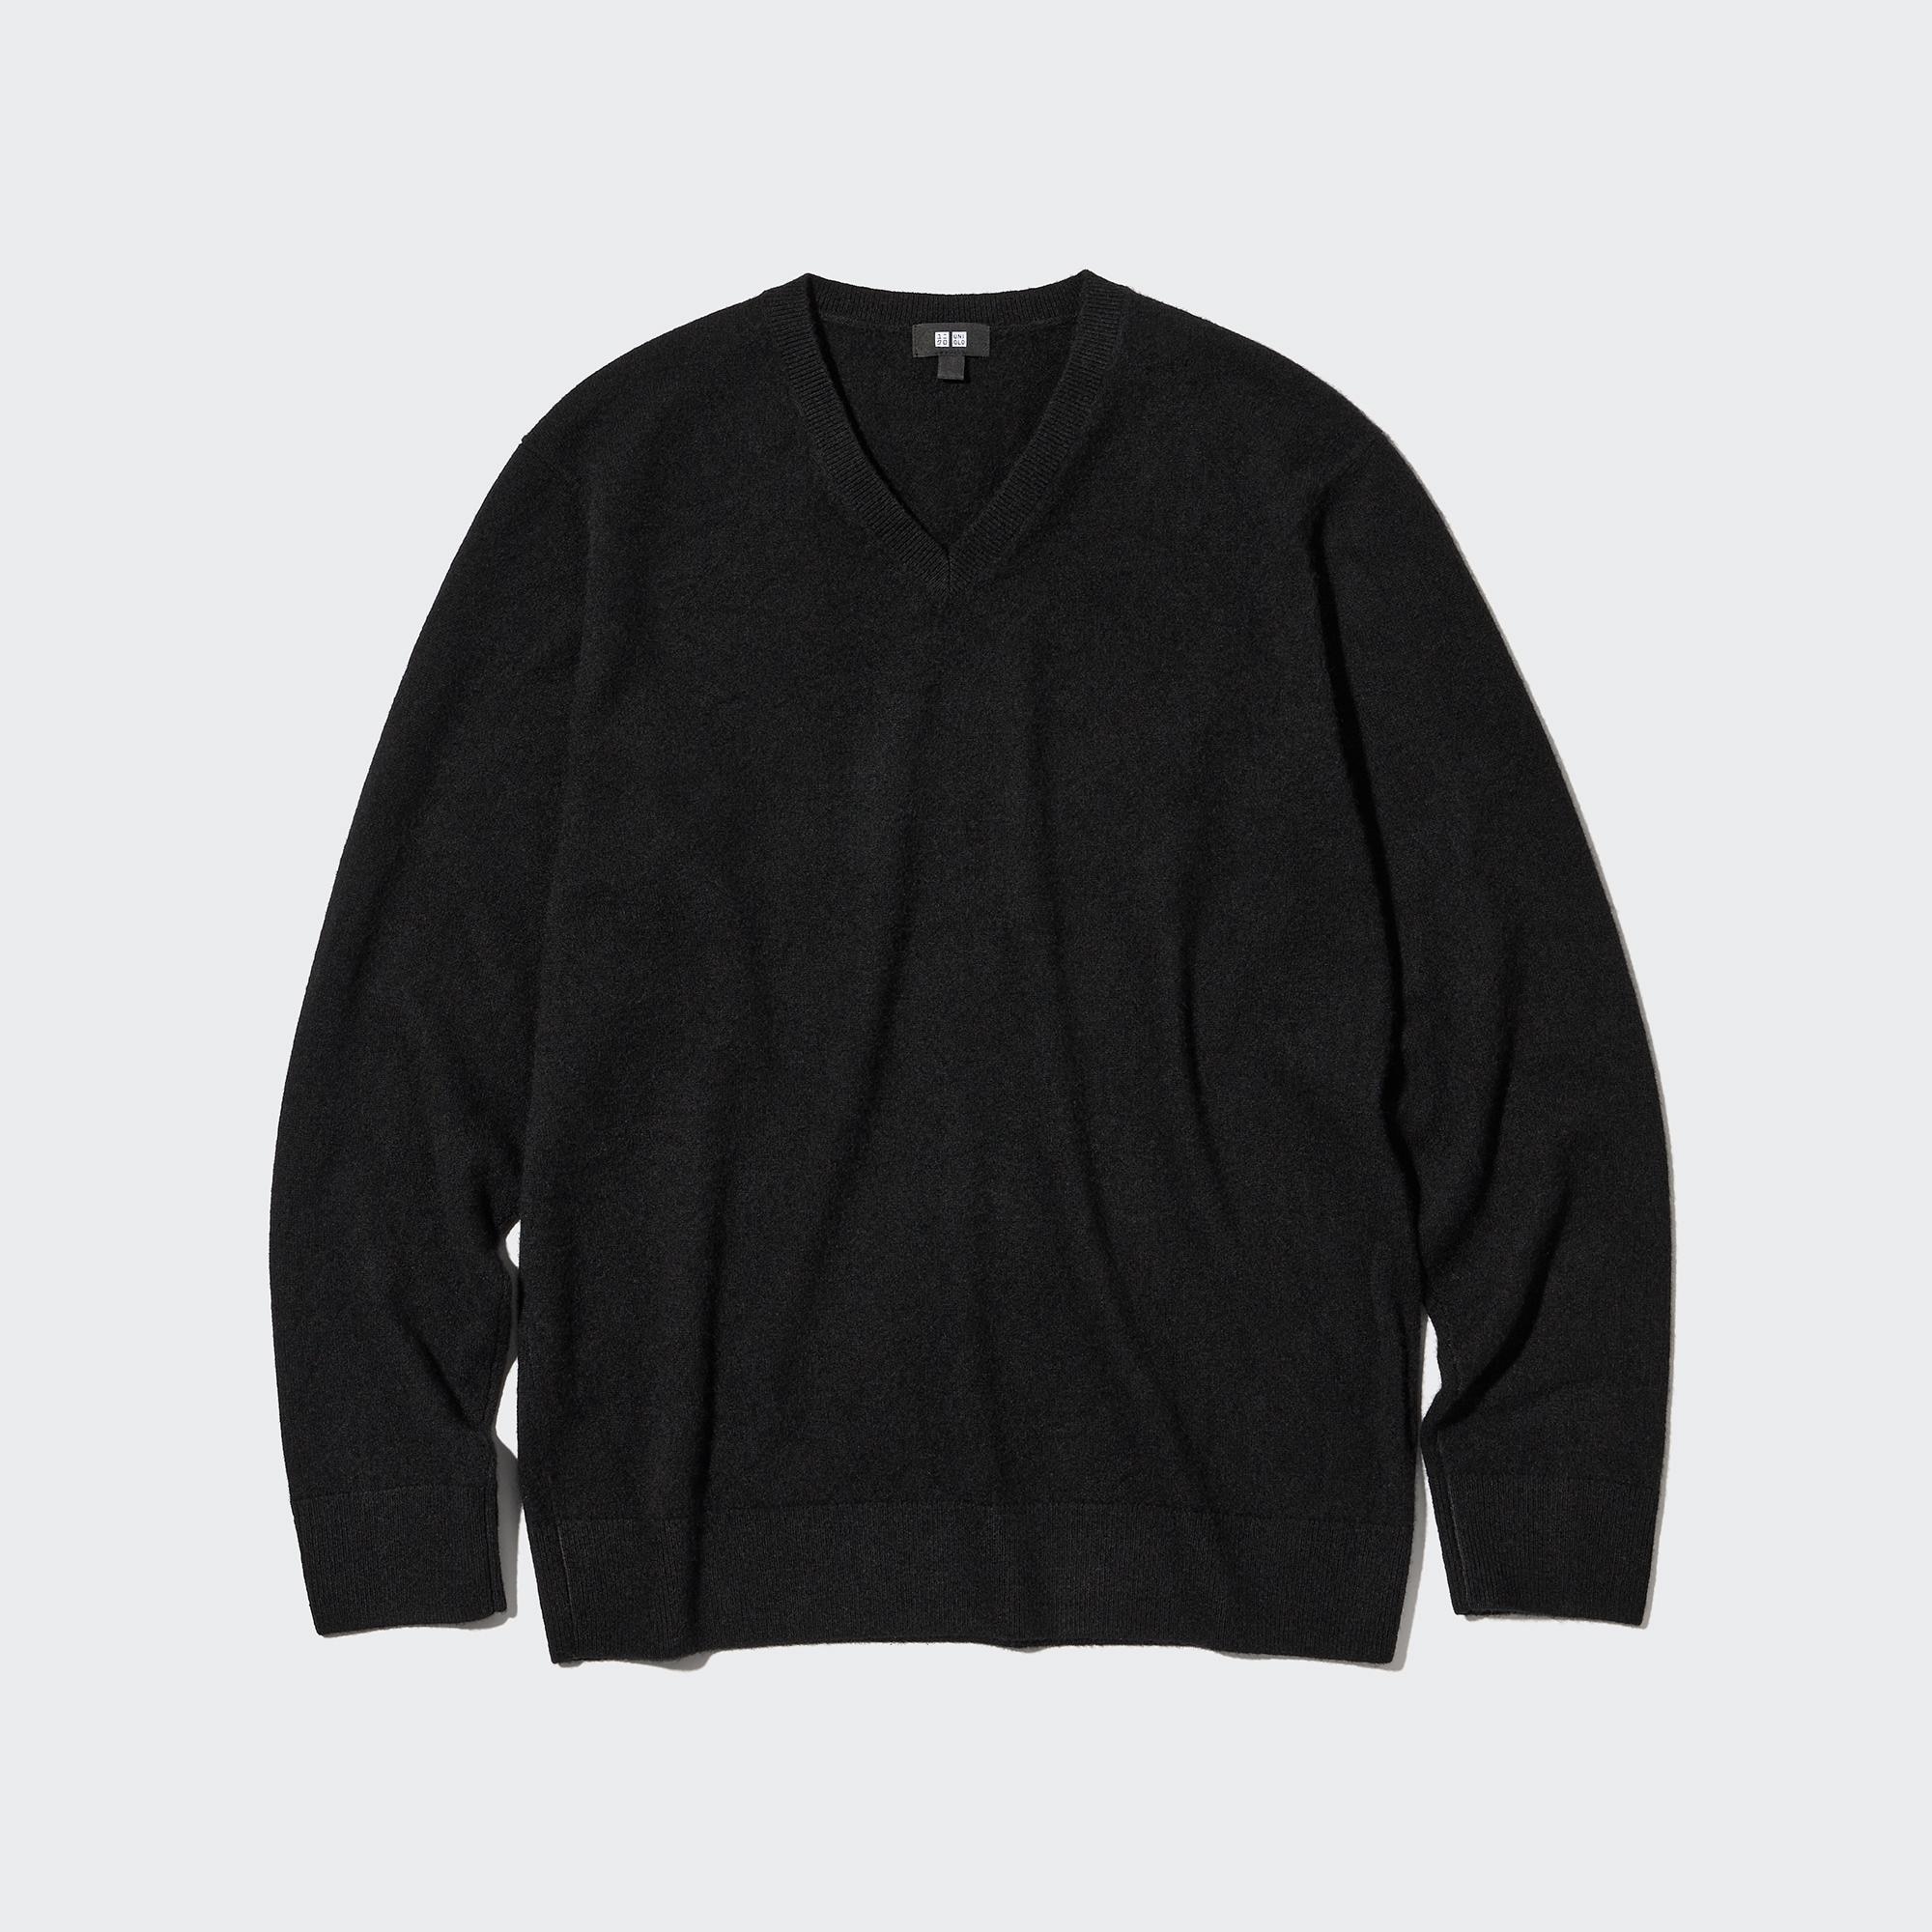 Knitwear collection  Merino cashmere and lambswool jumpers and cardigans   UNIQLO EU